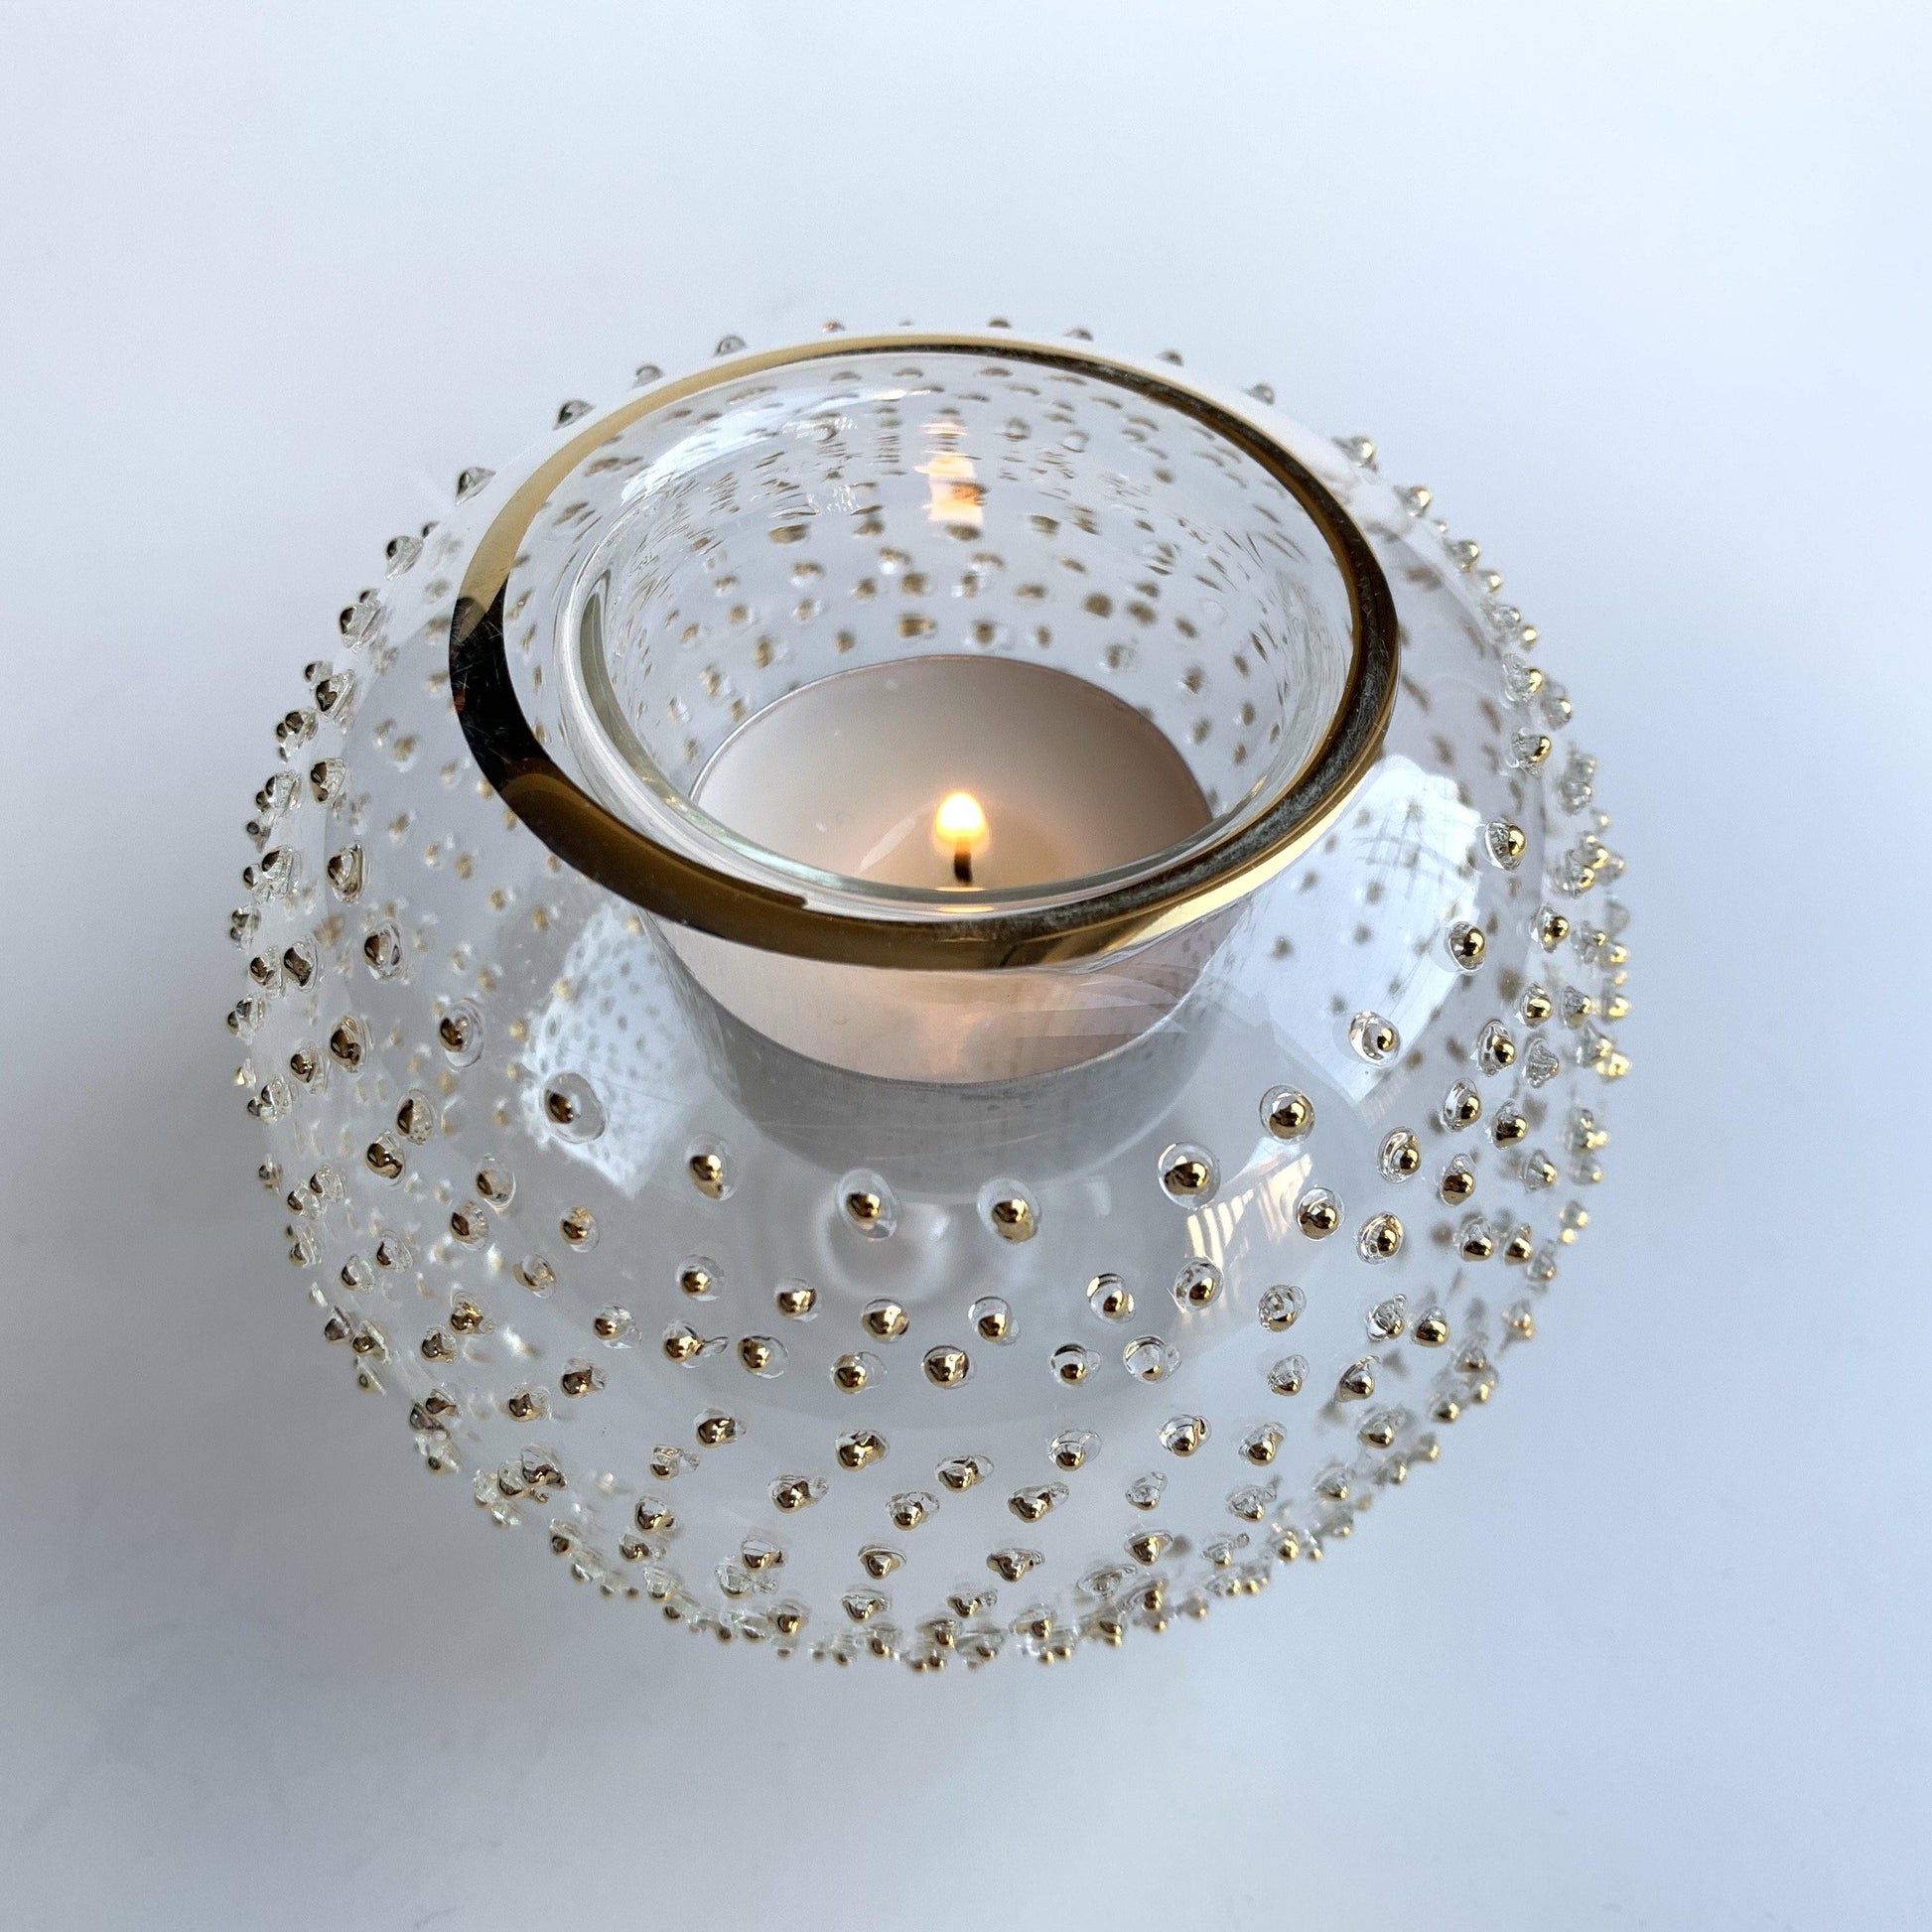 Blown Glass Candle Holder - Gold Dots